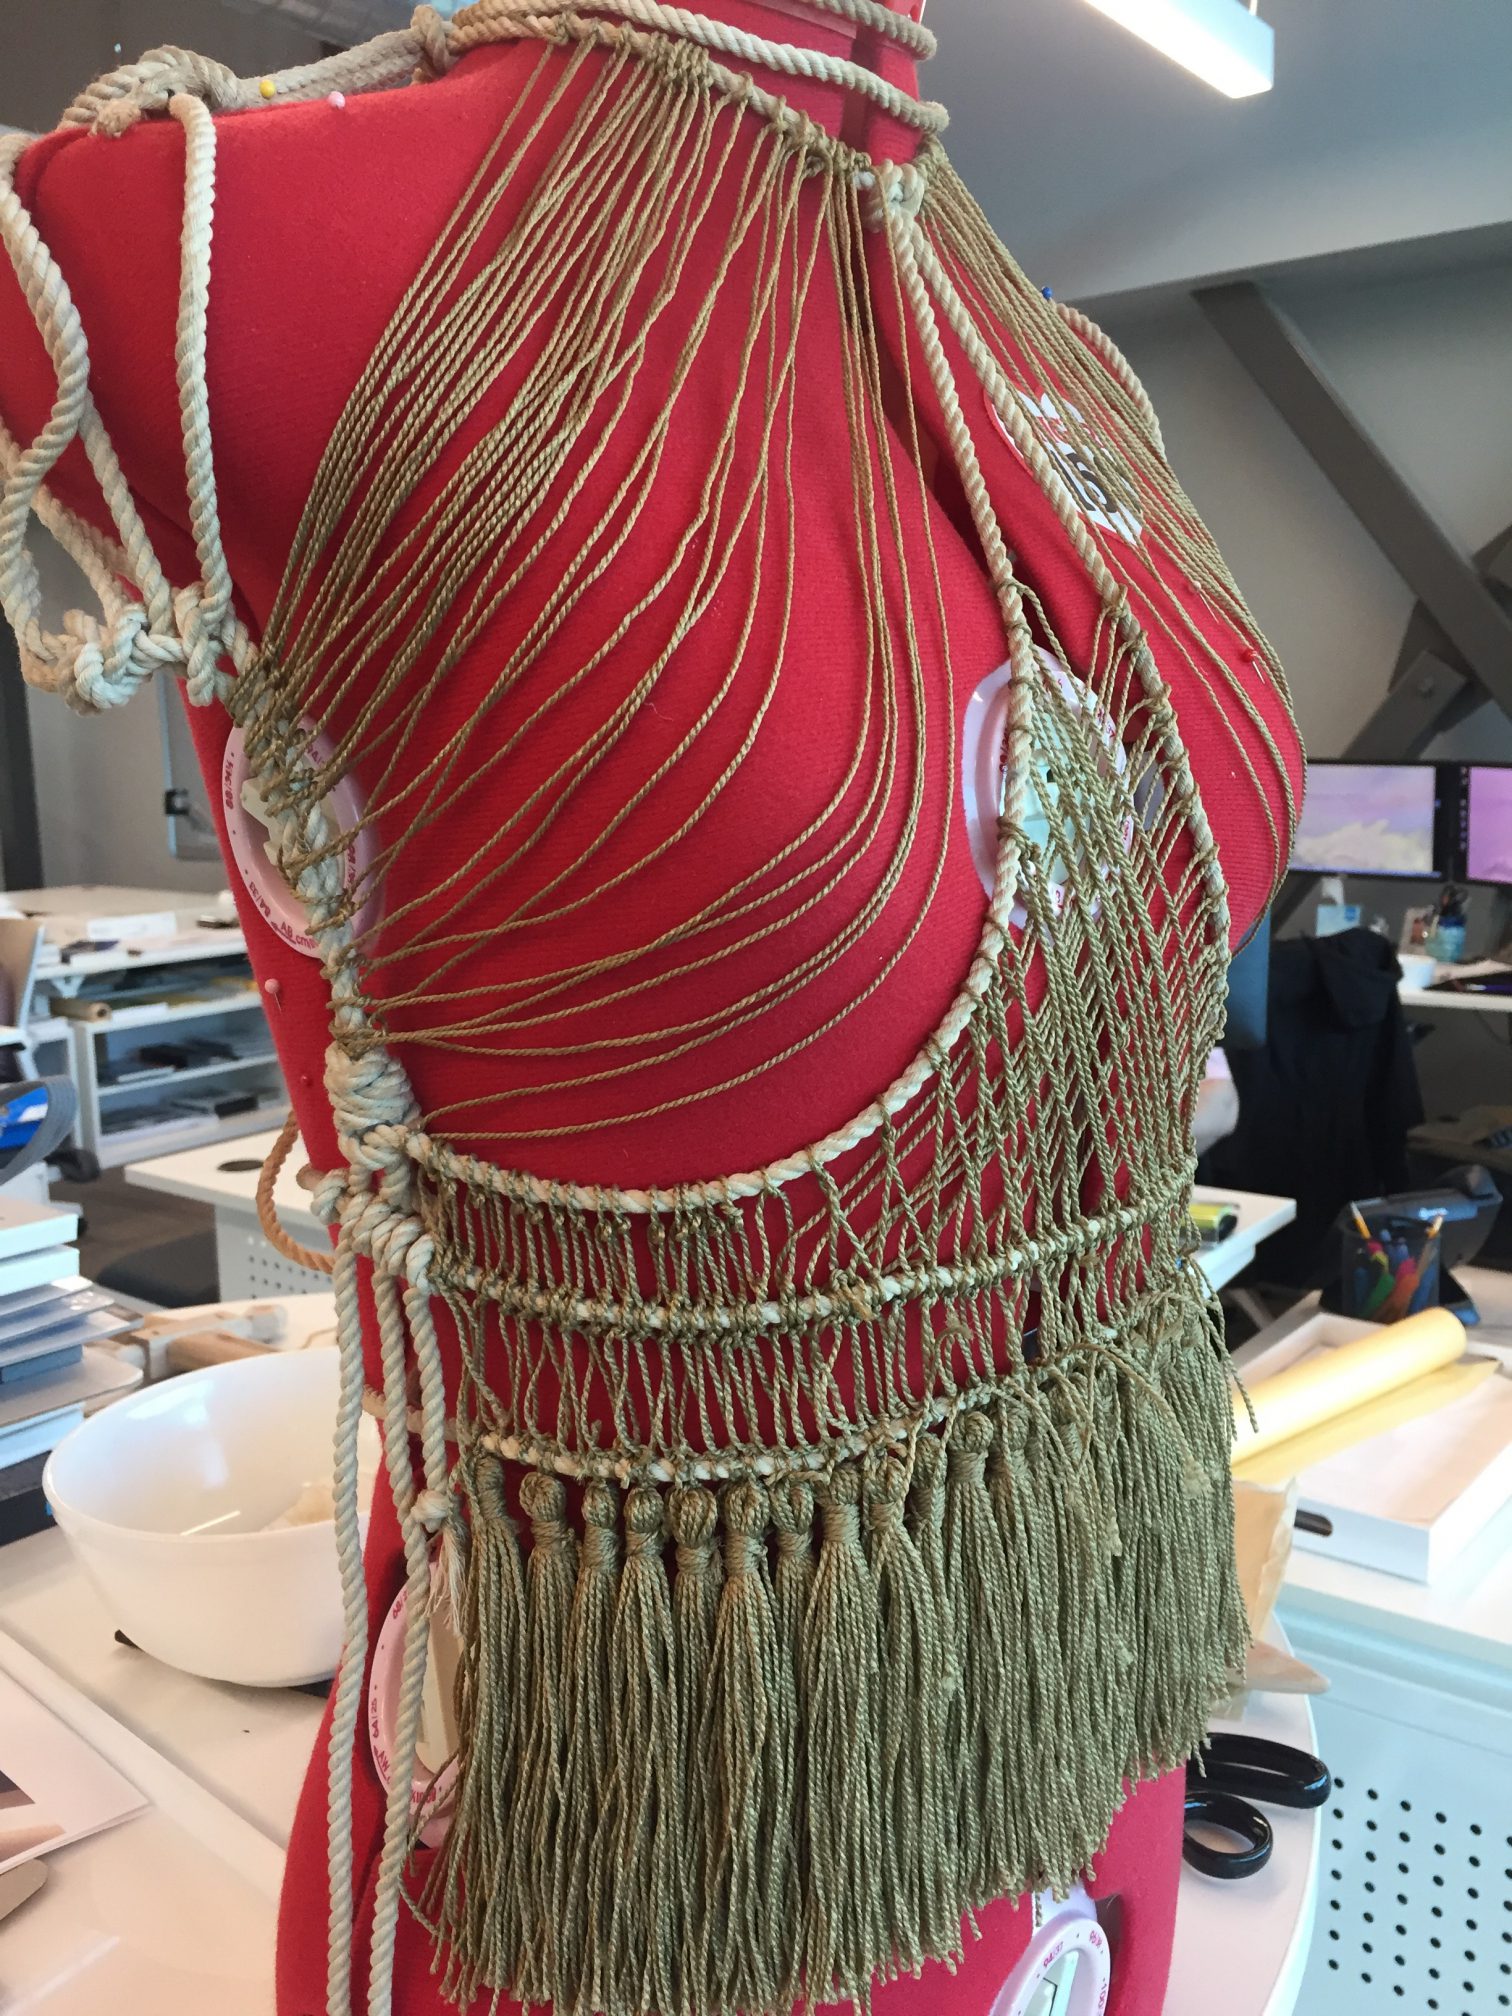 Shirt made of rope and string on red dress form